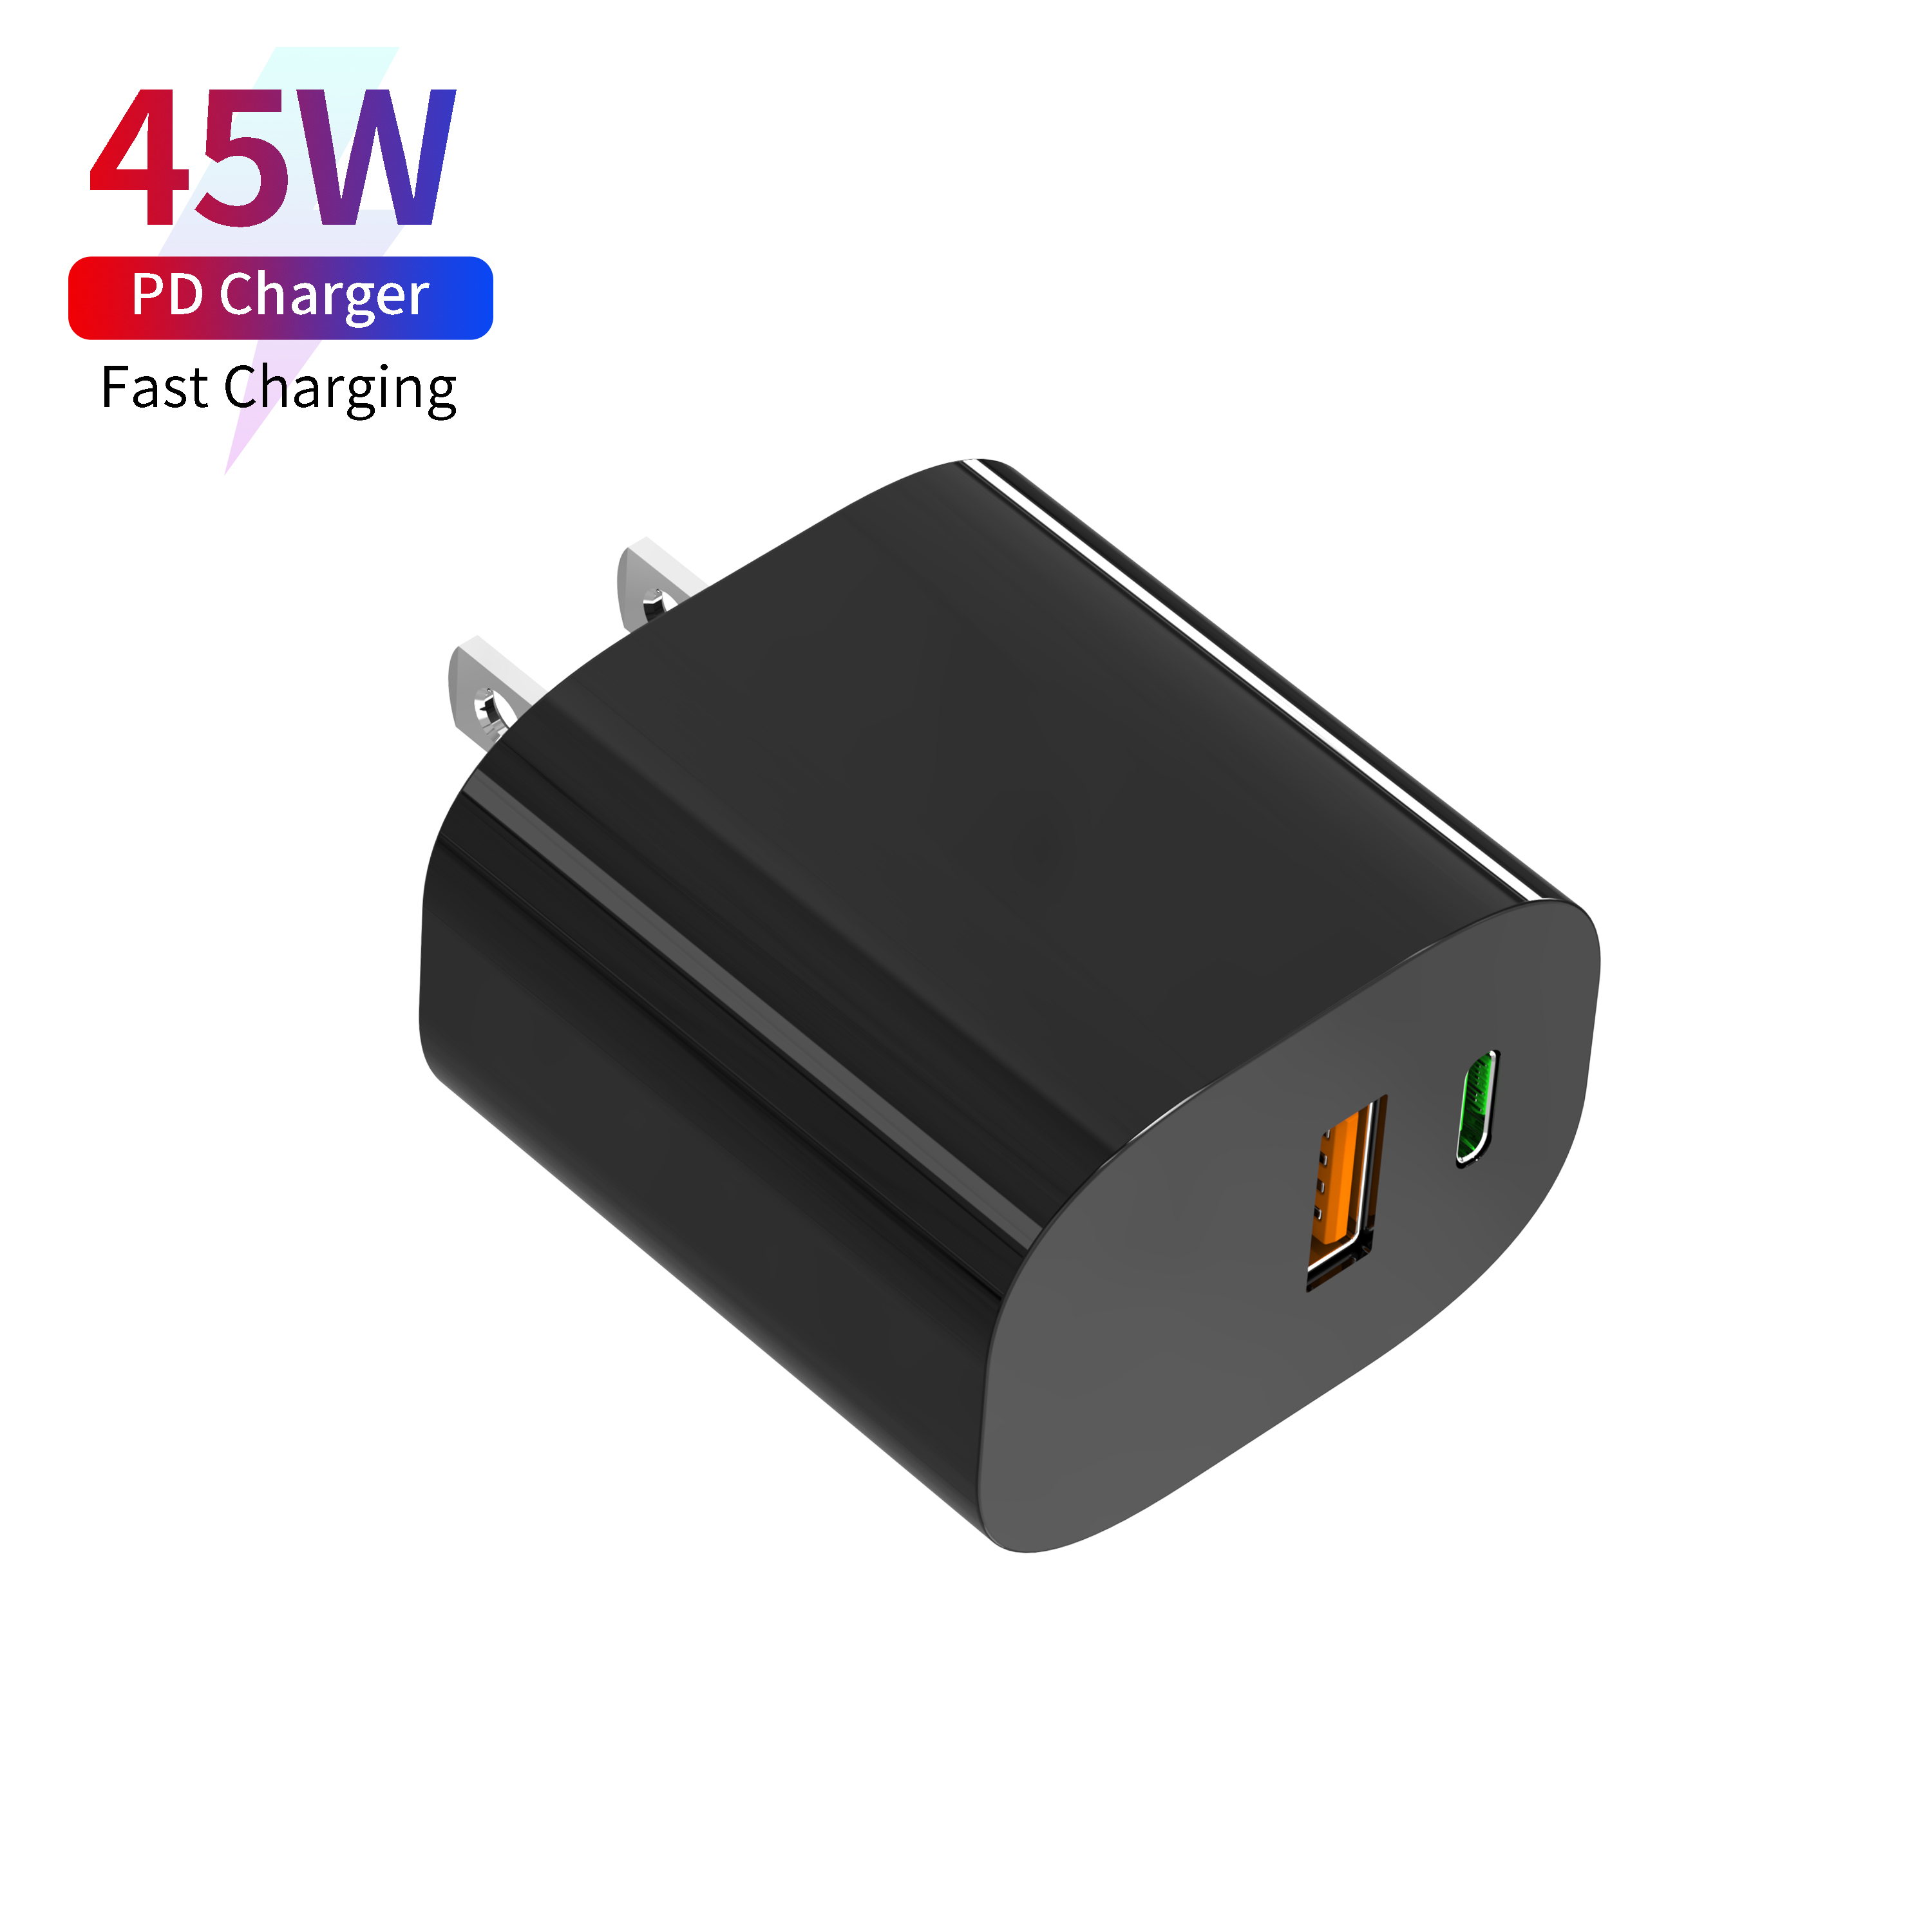 45w 1c1a Wall Charger-A2107-1C1A 